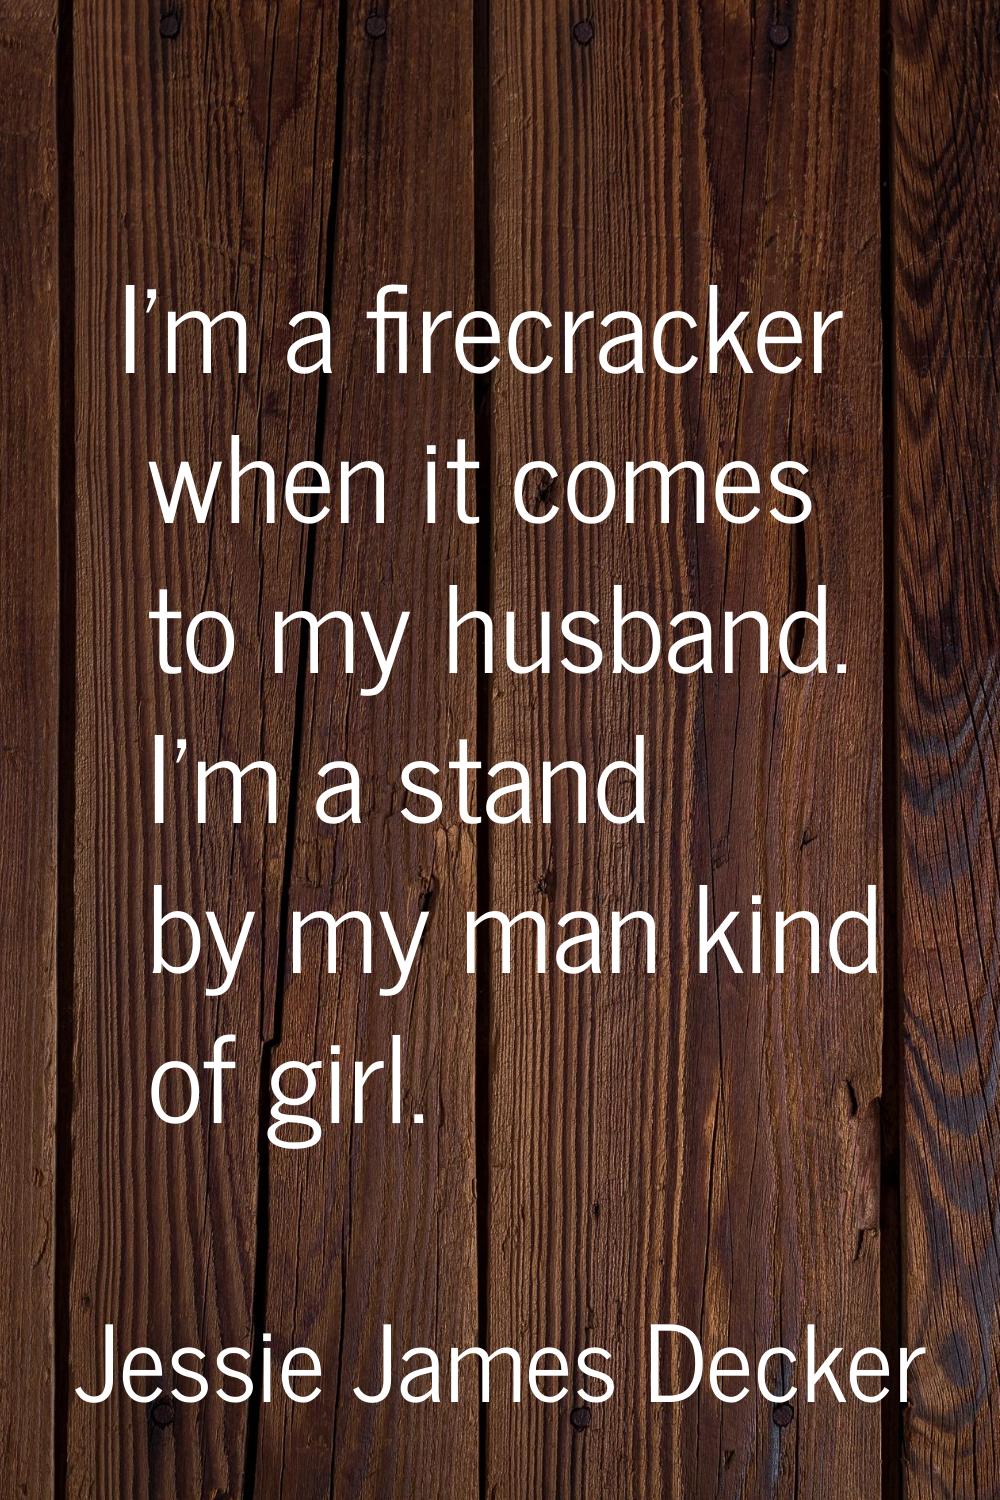 I'm a firecracker when it comes to my husband. I'm a stand by my man kind of girl.